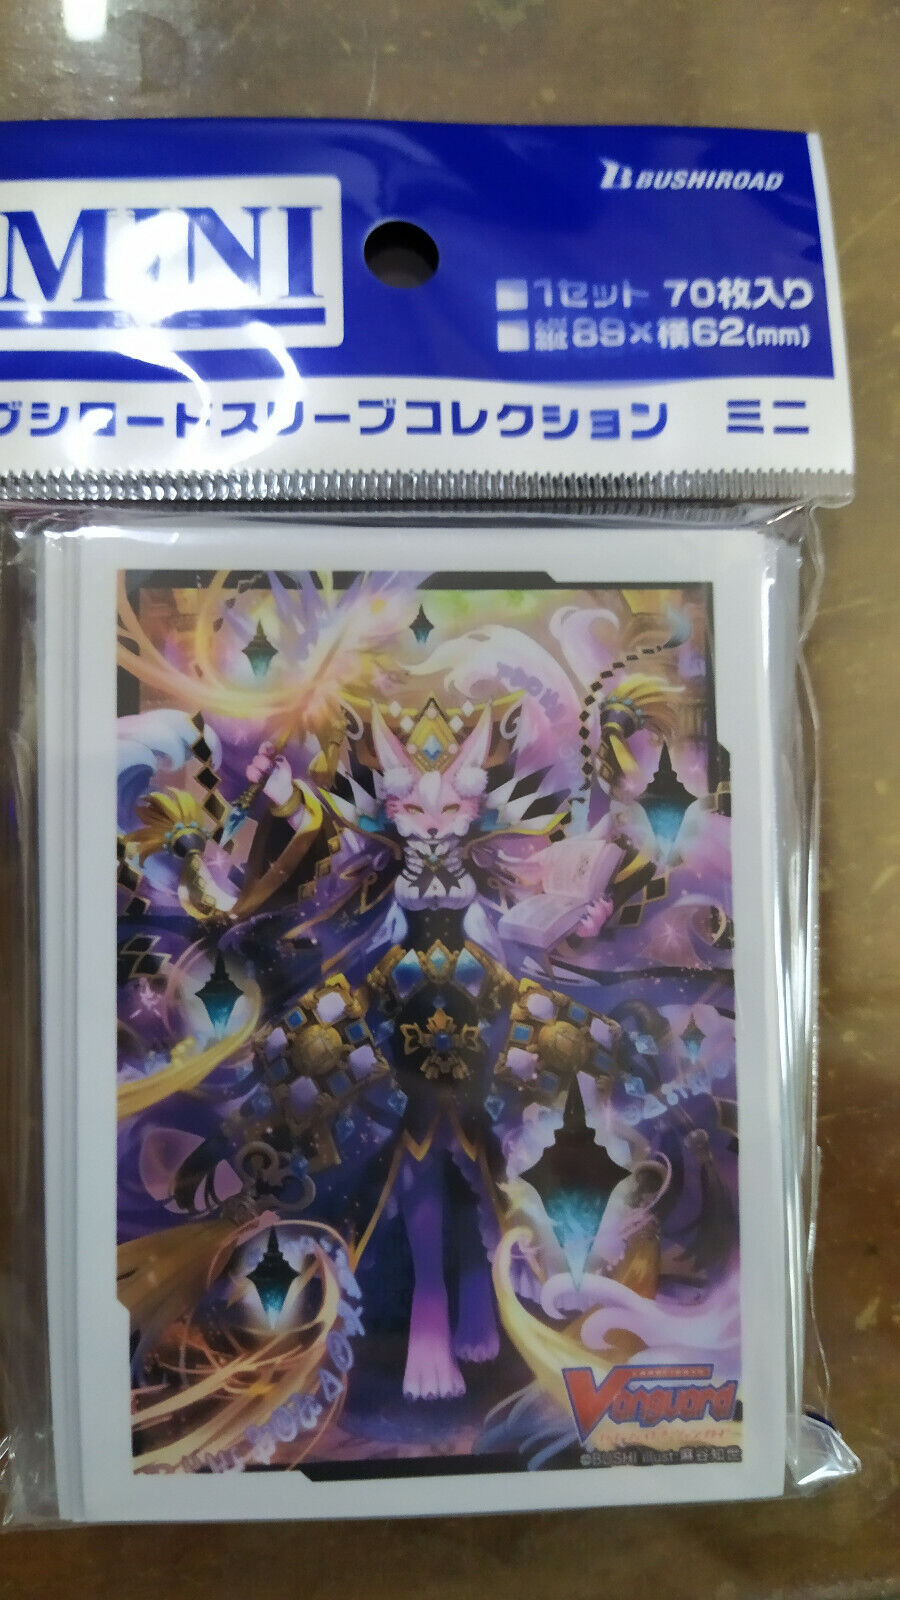 Popular popular Cardfight New life Vanguard CFV Bushiroad Sleeve 487 Isabelle Collection Black Lacquer